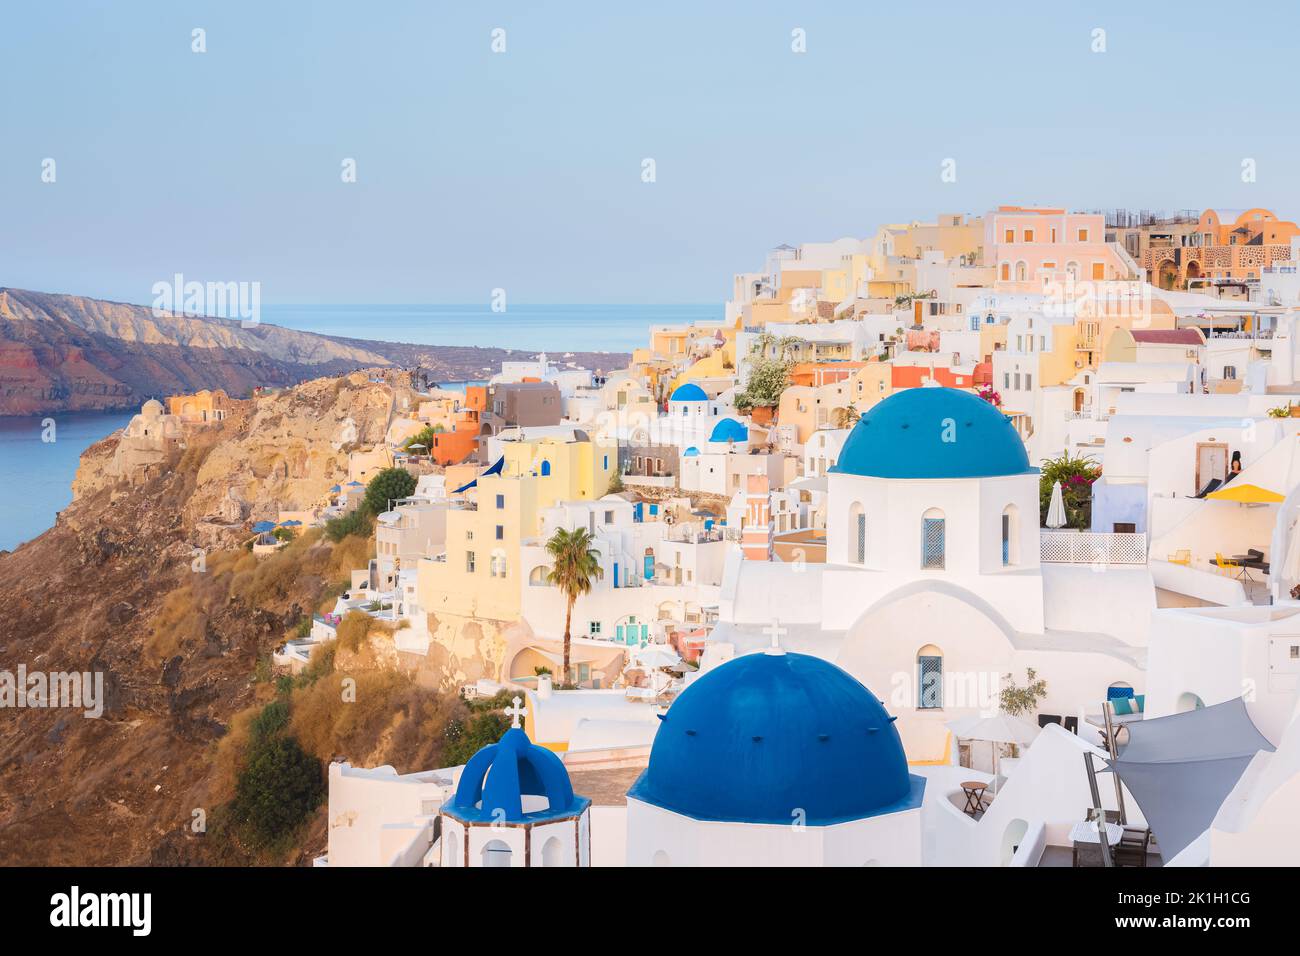 Seaside view of traditional white wash buildings and colourful blue dome churches at the popular seaside tourist resort village of Oia on the Greek is Stock Photo